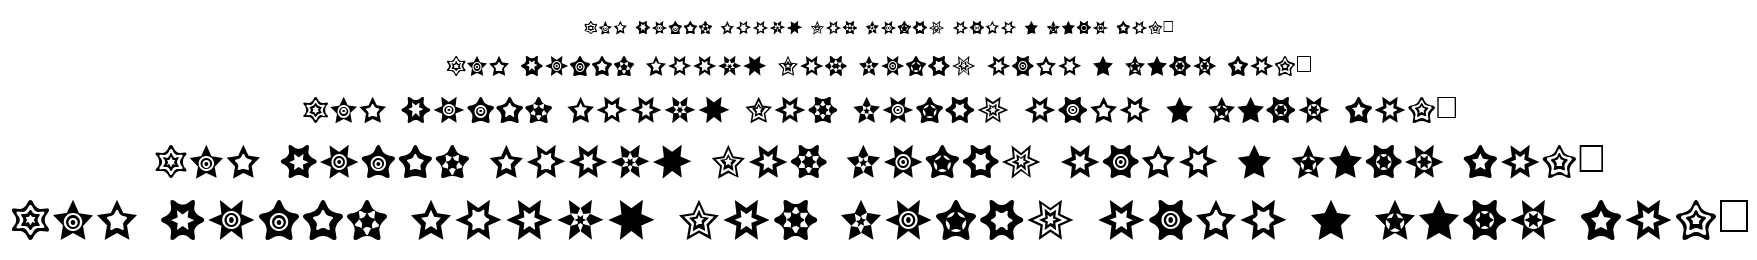 Star Things font